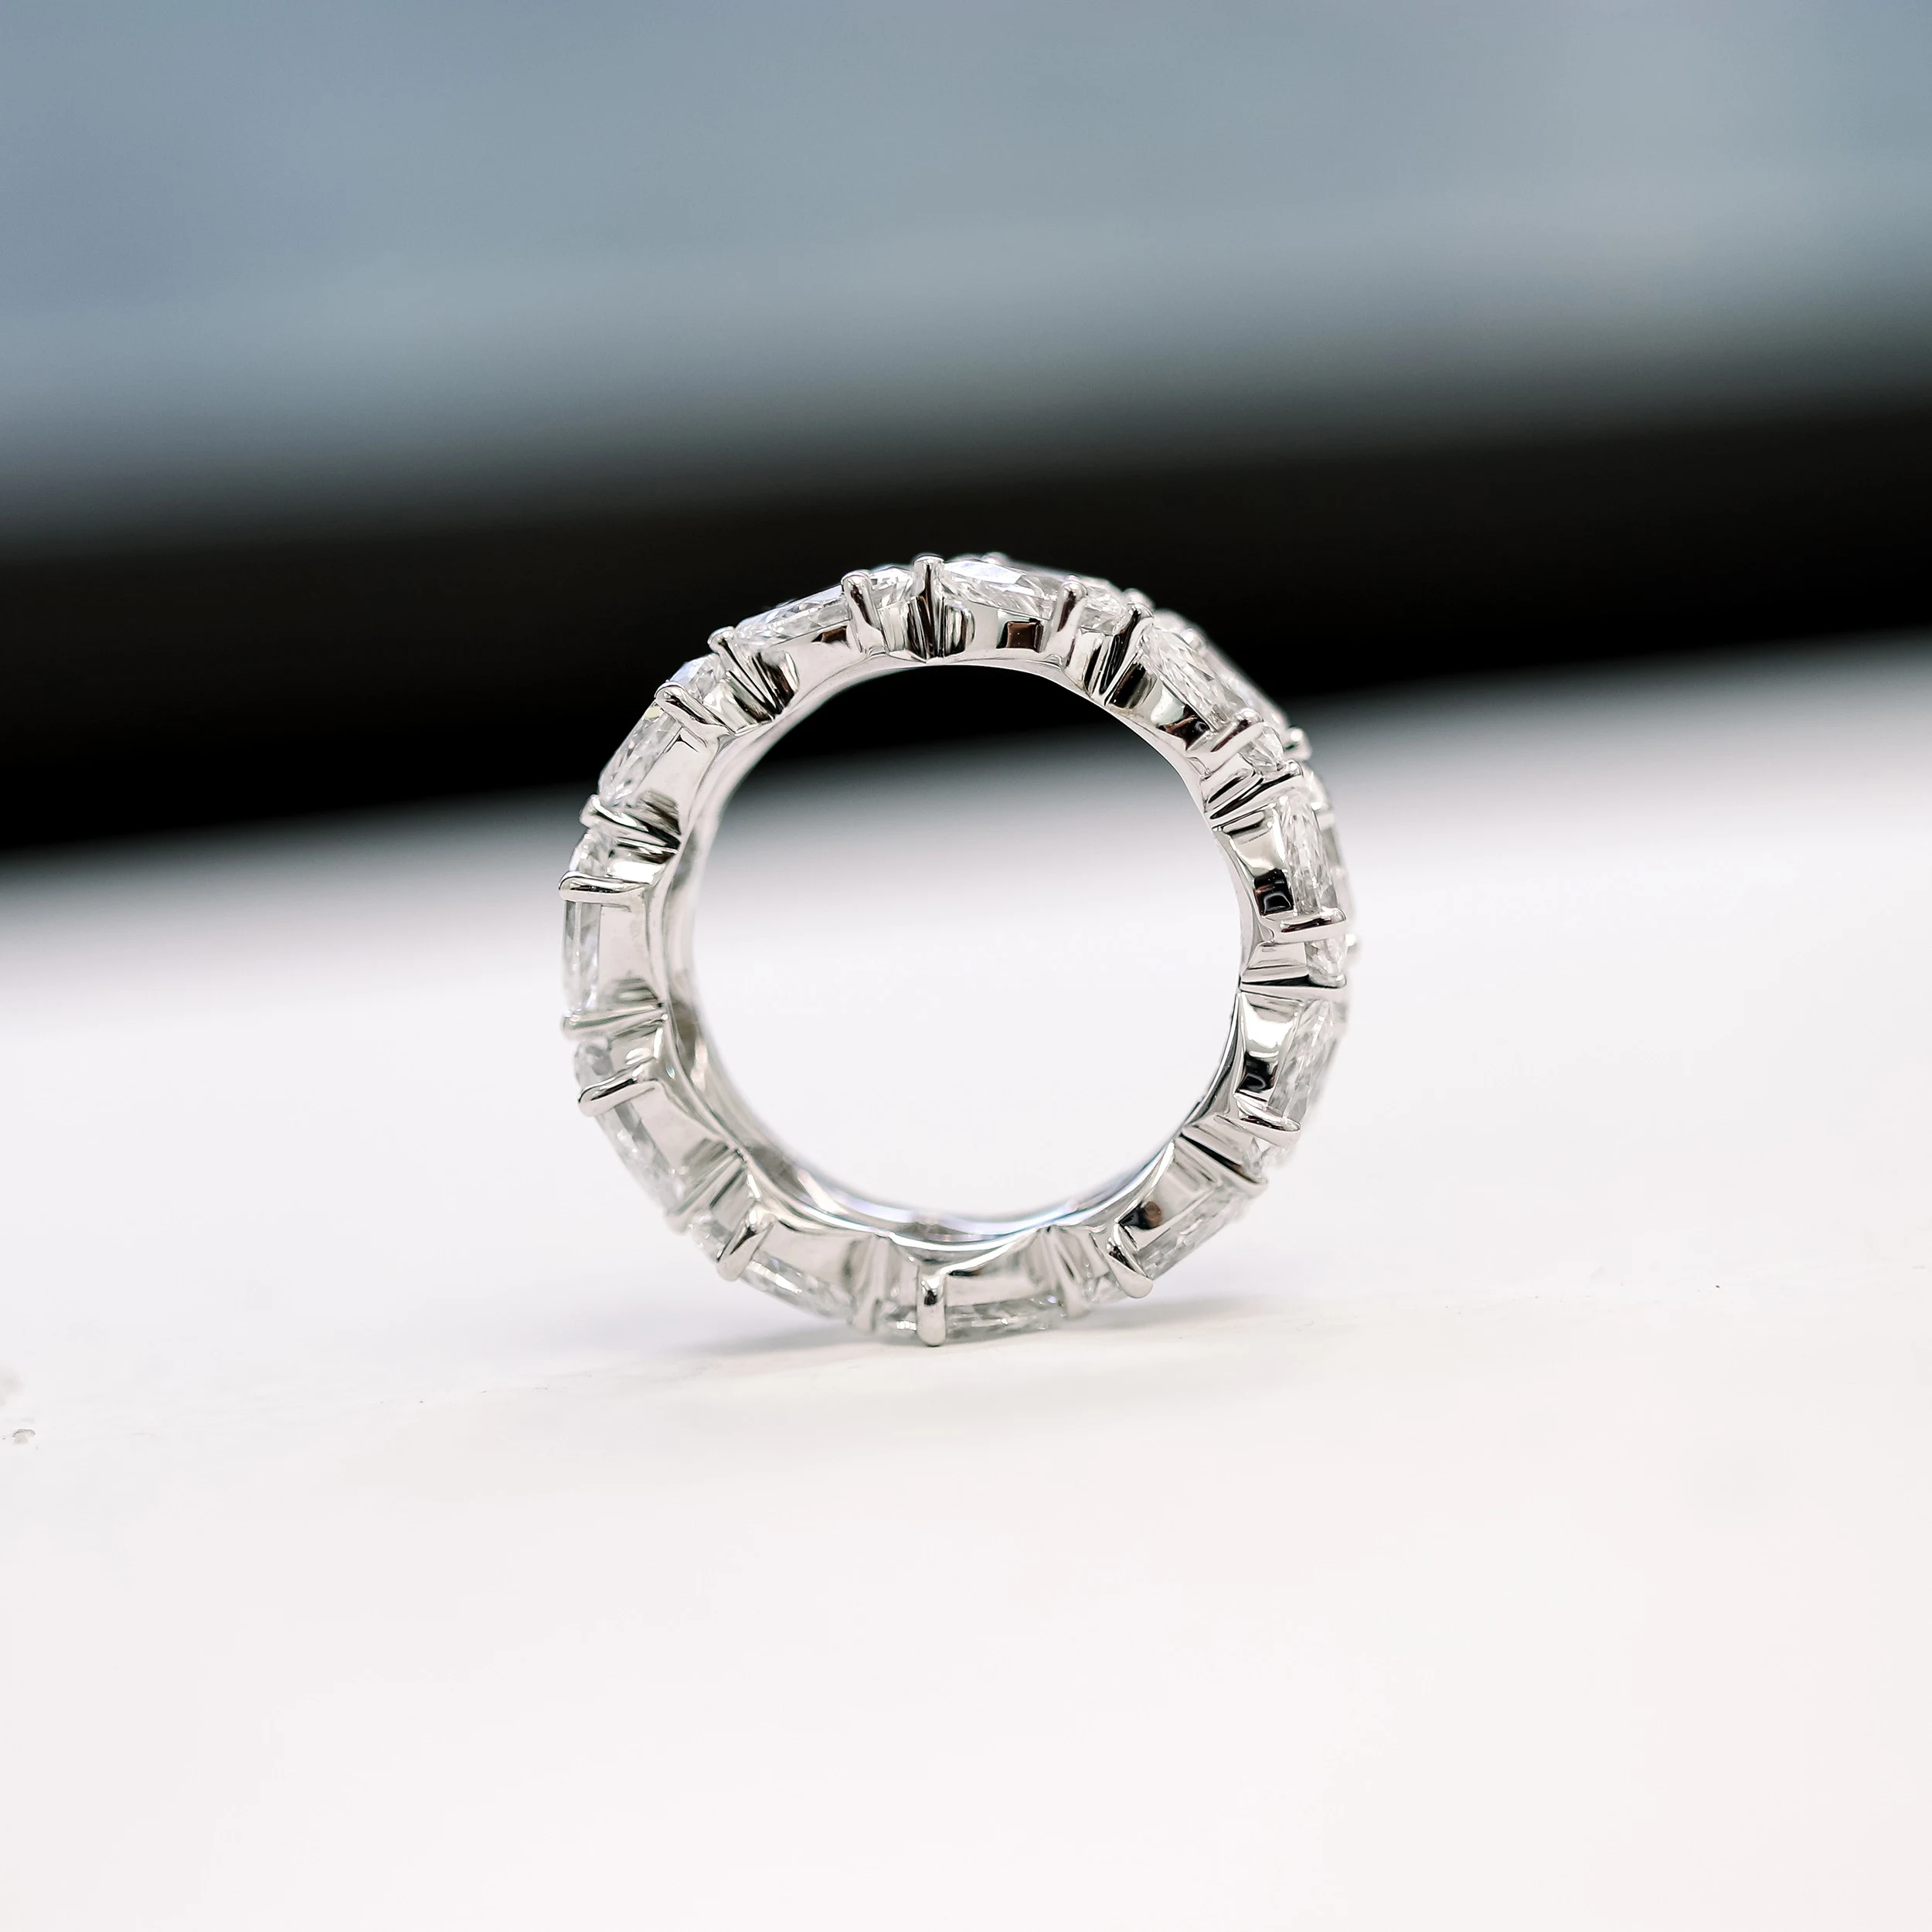 High Quality 3.0 ct Lab Diamonds set in 18 Karat White Gold Pear East-West Eternity Band (Main View)